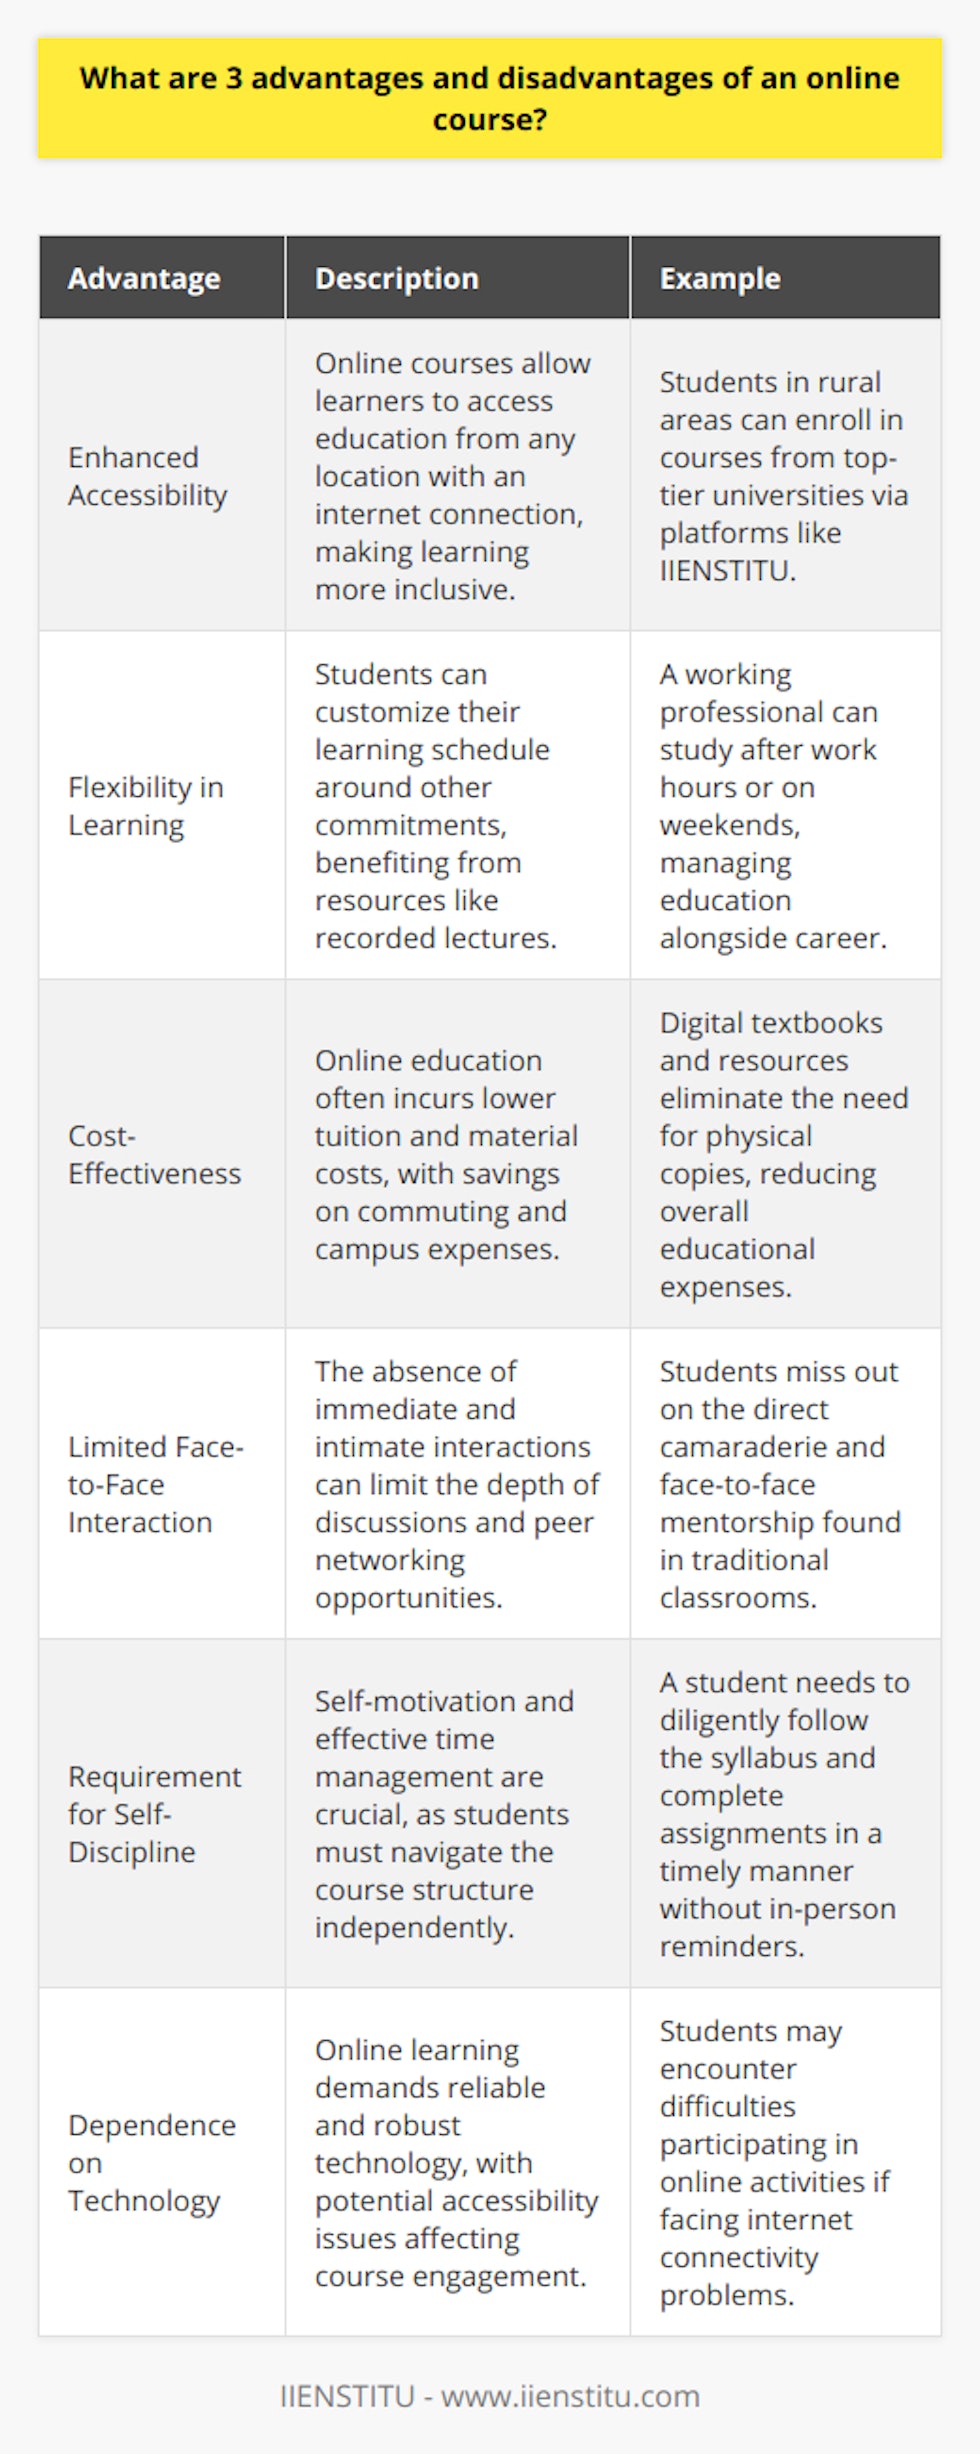 Online education has been gaining immense popularity due to its convenience and adaptability. However, like any educational format, it comes with its own set of pros and cons. Let’s delve into three key advantages and disadvantages of online courses to understand this modern approach to learning better.Advantages of Online Courses:1. Enhanced Accessibility:One of the most significant advantages is that online courses open up opportunities for learning regardless of one’s physical location. People from remote areas or those with mobility issues can access quality education from prestigious institutions, including platforms like IIENSTITU, which facilitate learning across the globe. The only requirement is an internet connection, making education more inclusive.2. Flexibility in Learning:Online courses provide an unparalleled level of flexibility. Students can often create their own schedules, fitting study time around other life commitments. Such flexibility is particularly valuable for those balancing education with work, family care, or other responsibilities. For example, recorded lectures allow students to learn at the times most convenient for them, which is especially beneficial for lifelong learners who are often managing multiple roles.3. Cost-Effectiveness:Many students are drawn to online courses due to their cost advantages. Traditional brick-and-mortar institutions have expenses like classroom maintenance and campus facilities that are not applicable to online platforms, often resulting in lower tuition fees and reduced costs for materials, as many resources are available digitally. Additionally, students save on commuting costs and other campus-related expenses, which can add up to significant savings.Disadvantages of Online Courses:1. Limited Face-to-Face Interaction:While online education can connect learners to tutors across the world, it often lacks the immediacy and intimacy of face-to-face interactions. This can affect the depth of discussions and may impede networking opportunities that are naturally built in classroom environments. For many, the collegial atmosphere and direct engagement with peers and instructors are irreplaceable benefits of on-site learning.2. Requirement for Self-Discipline:The flexibility of online courses, while advantageous, requires a considerable amount of self-discipline. Since there is no fixed schedule or physical presence required, students must be adept at time management and self-motivation. Staying on track with course materials, assignments, and staying engaged in the learning process without the structure of a traditional classroom environment can be a struggle for some students.3. Dependence on Technology:Reliable access to technology is fundamental for successful online learning. Students need consistent and high-speed internet service to access course materials and participate in online activities without interruption. Technological issues can prove to be a significant barrier, potentially leading to missed deadlines or content, especially in regions where internet access is not as robust. Additionally, there's a need for a certain level of technological literacy to navigate the online learning platforms effectively.In conclusion, online courses present a number of attractive benefits, particularly in terms of accessibility, flexibility, and cost savings. However, they also come with challenges like reduced personal interaction, the need for strong self-motivation, and technology dependence. Prospective online learners should weigh these factors carefully to determine if online education is the right choice for their individual needs and learning styles.